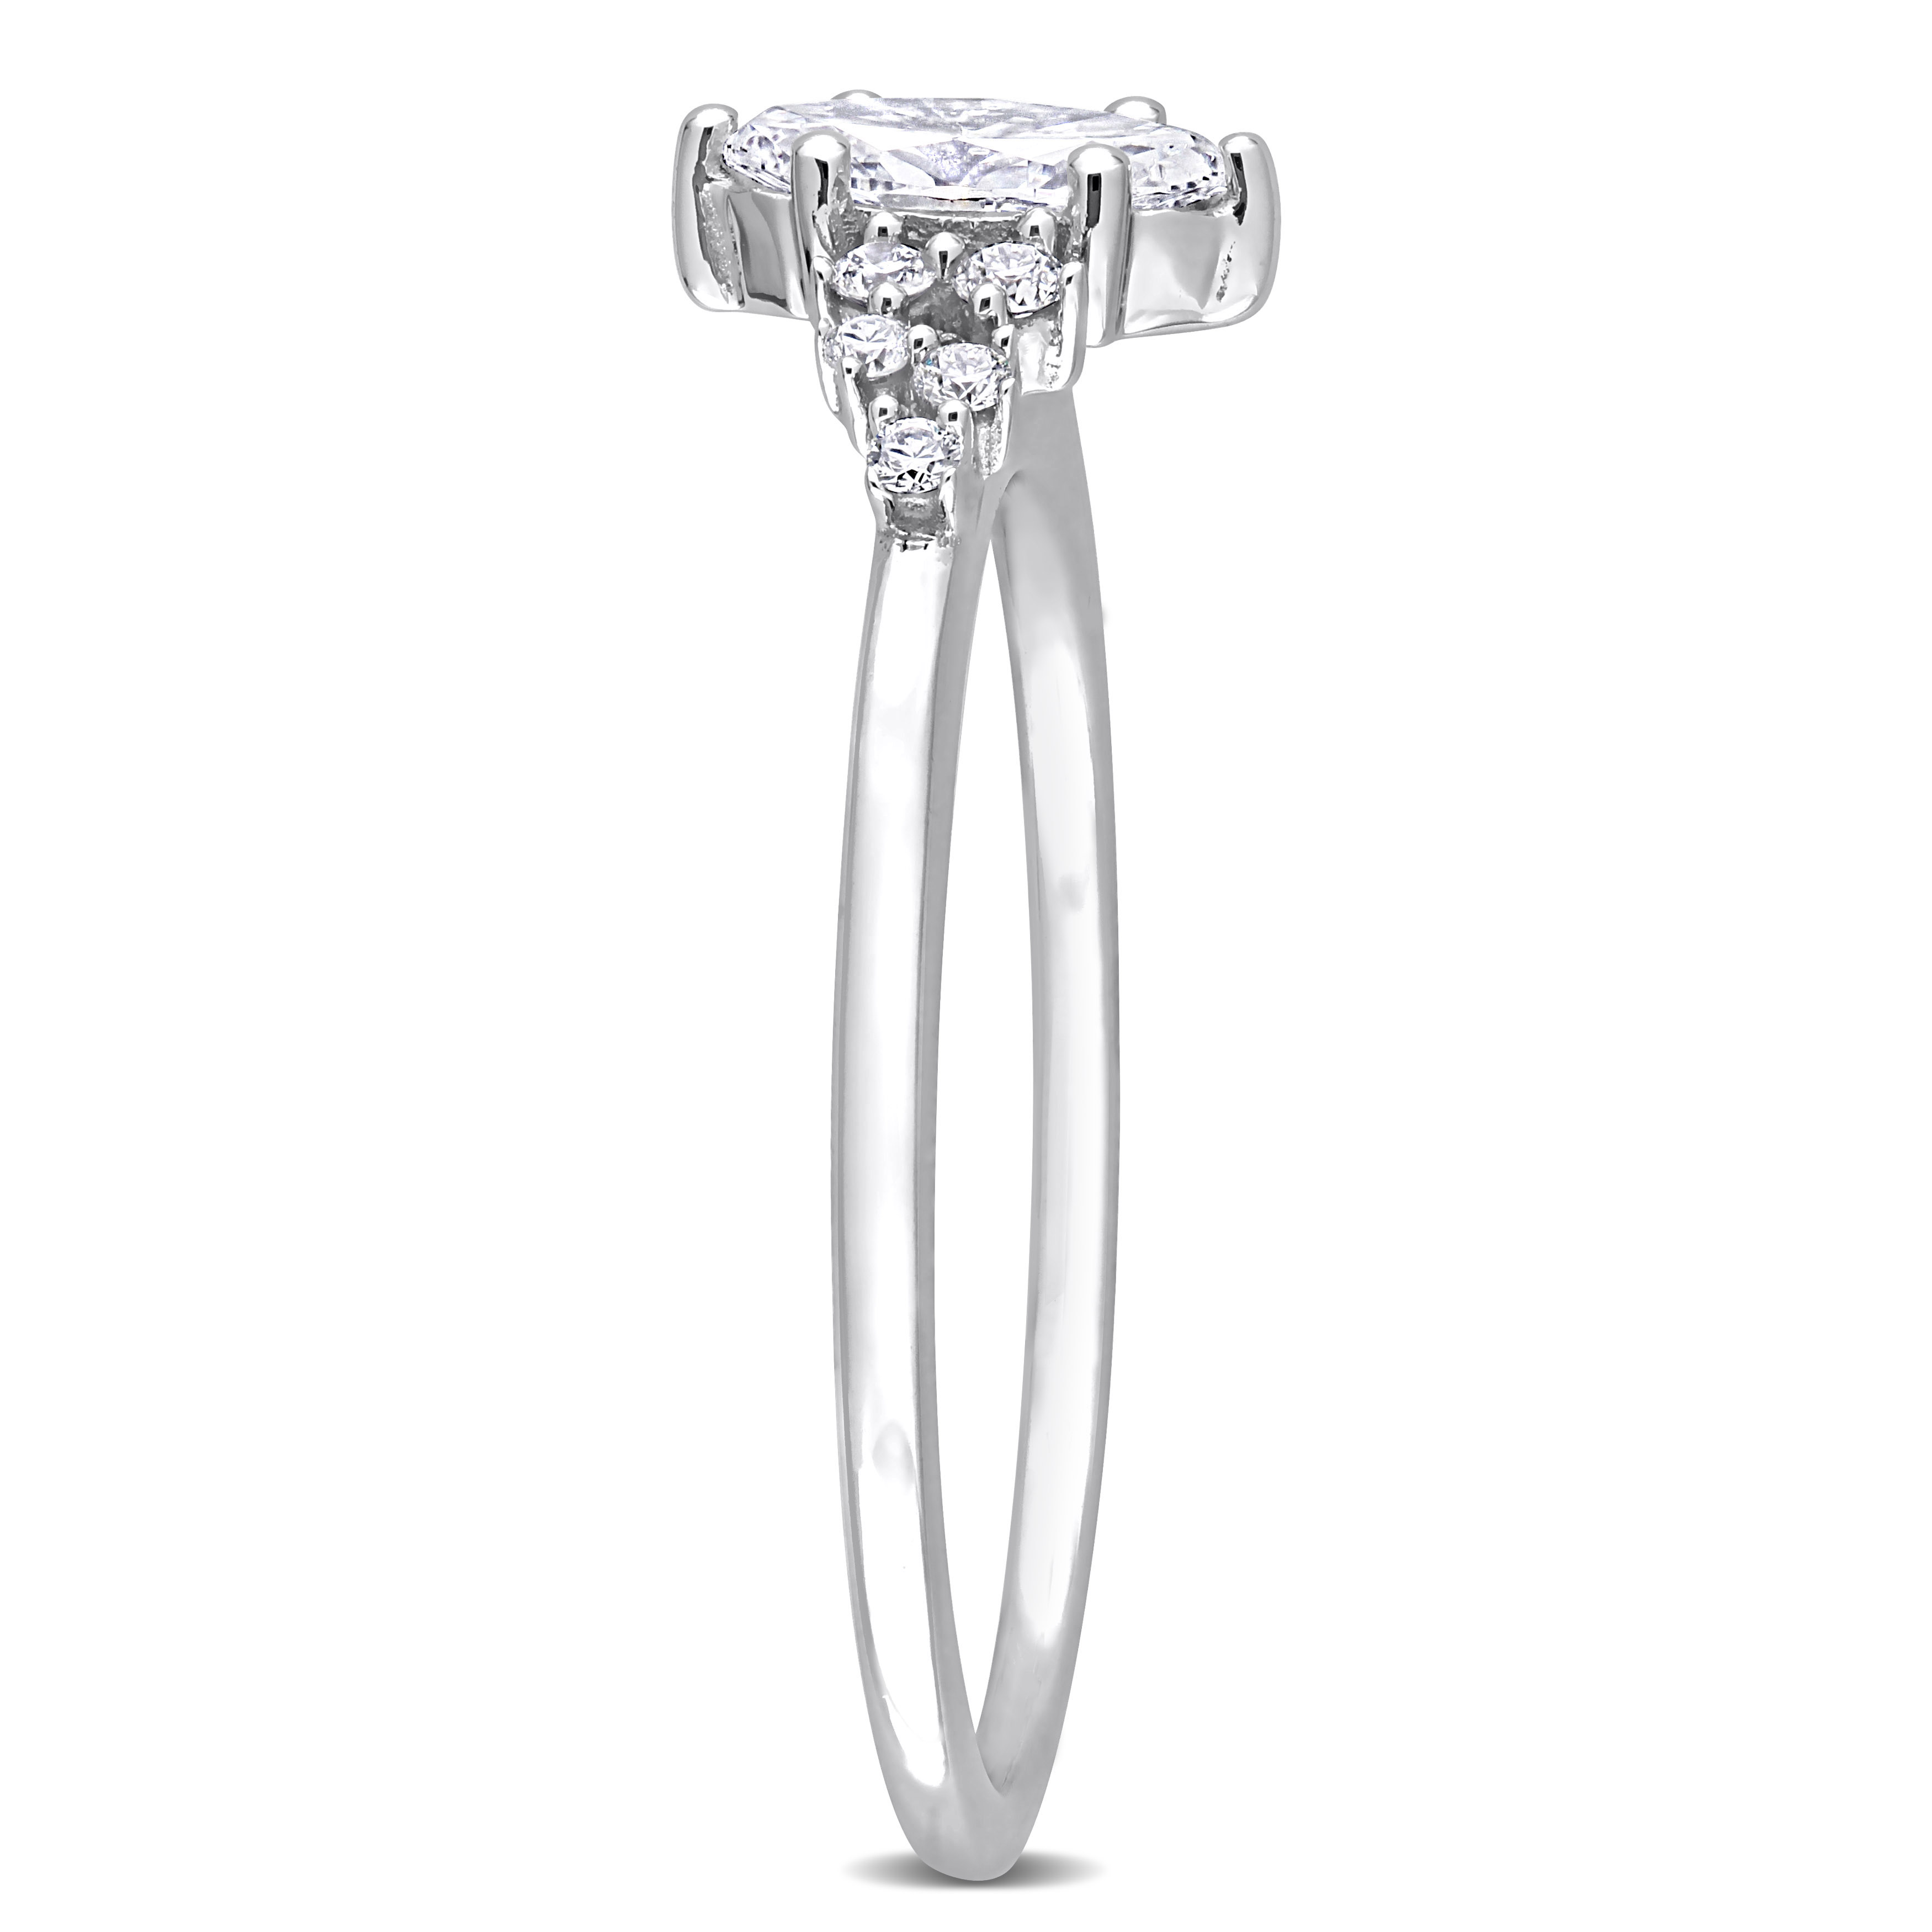 1/2 CT TW Marquise and Round Diamond Engagement Ring in 14k White Gold